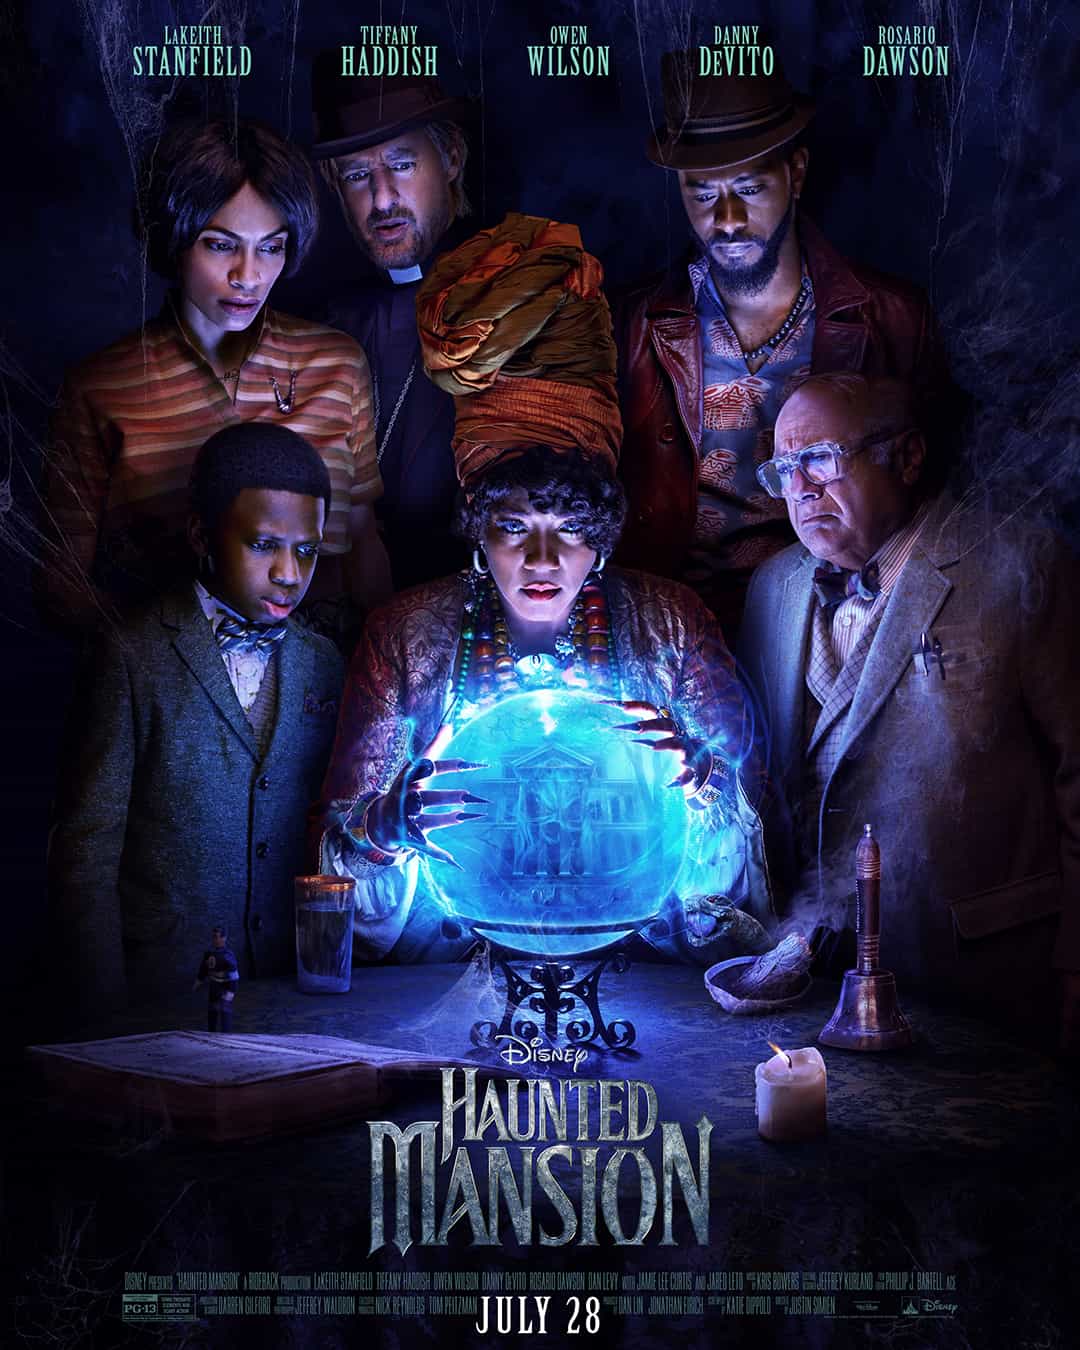 Haunted Mansion has been given a 12A age rating in the UK for moderate horror